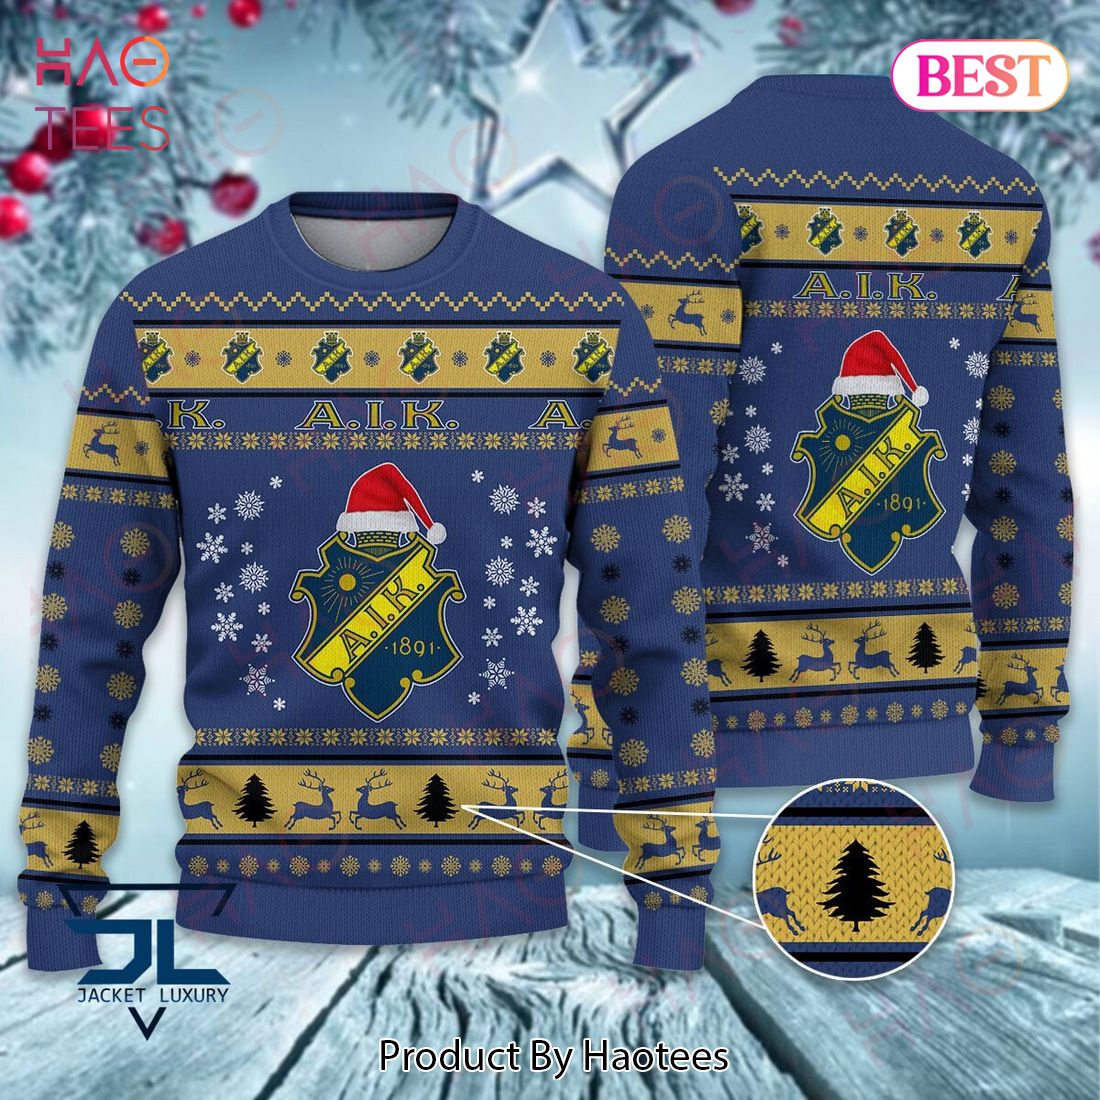 HOT AIK 1891 Christmas Luxury Brand Sweater Limited Edition